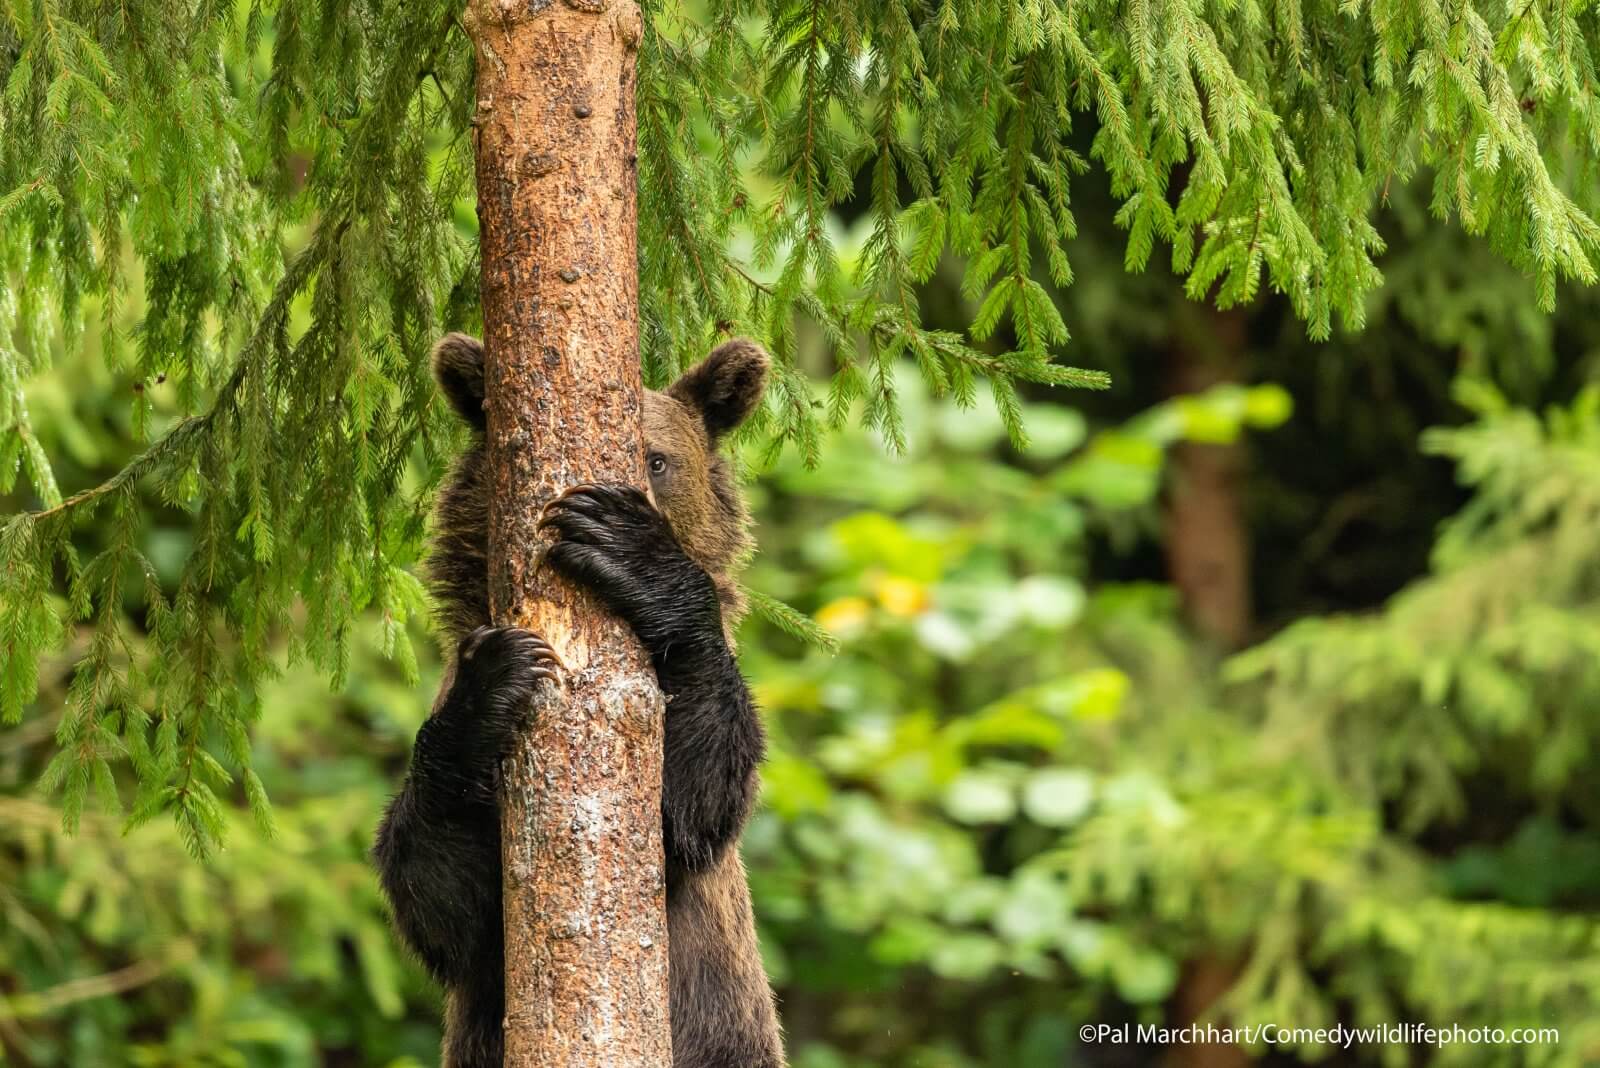 “ A young bear descending from a tree looks like he/she is playing hide and seek.”